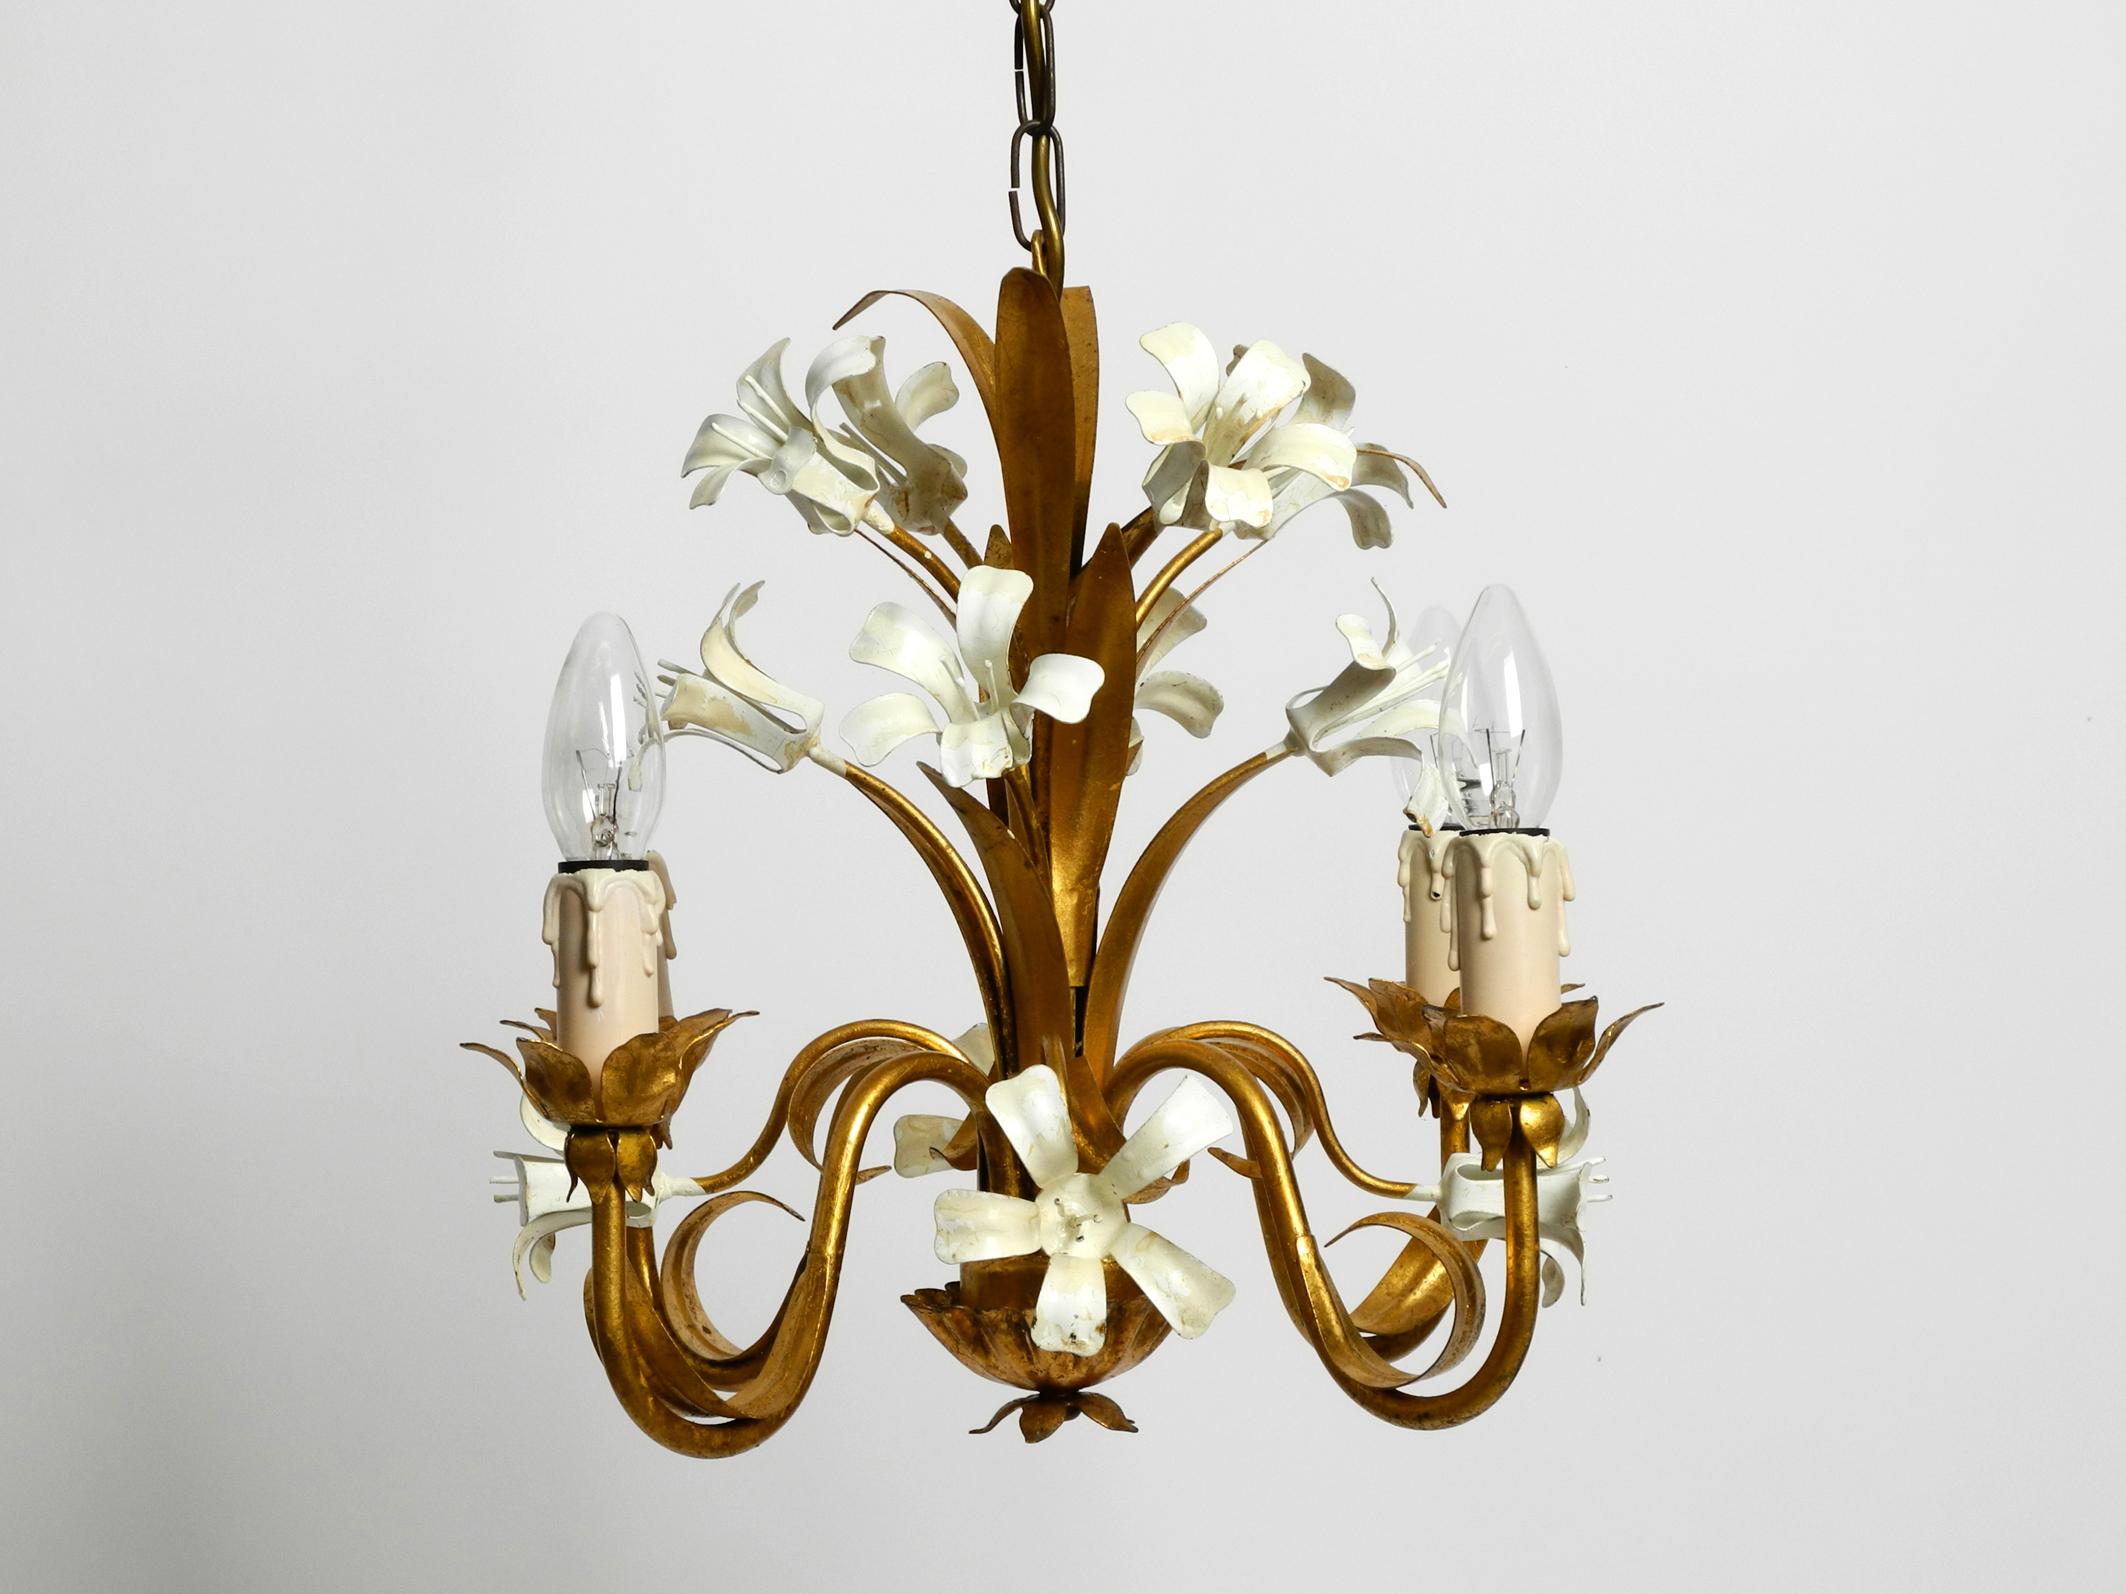 Small beautiful 1960s gold-plated 4-arm metal chandelier For Sale 9